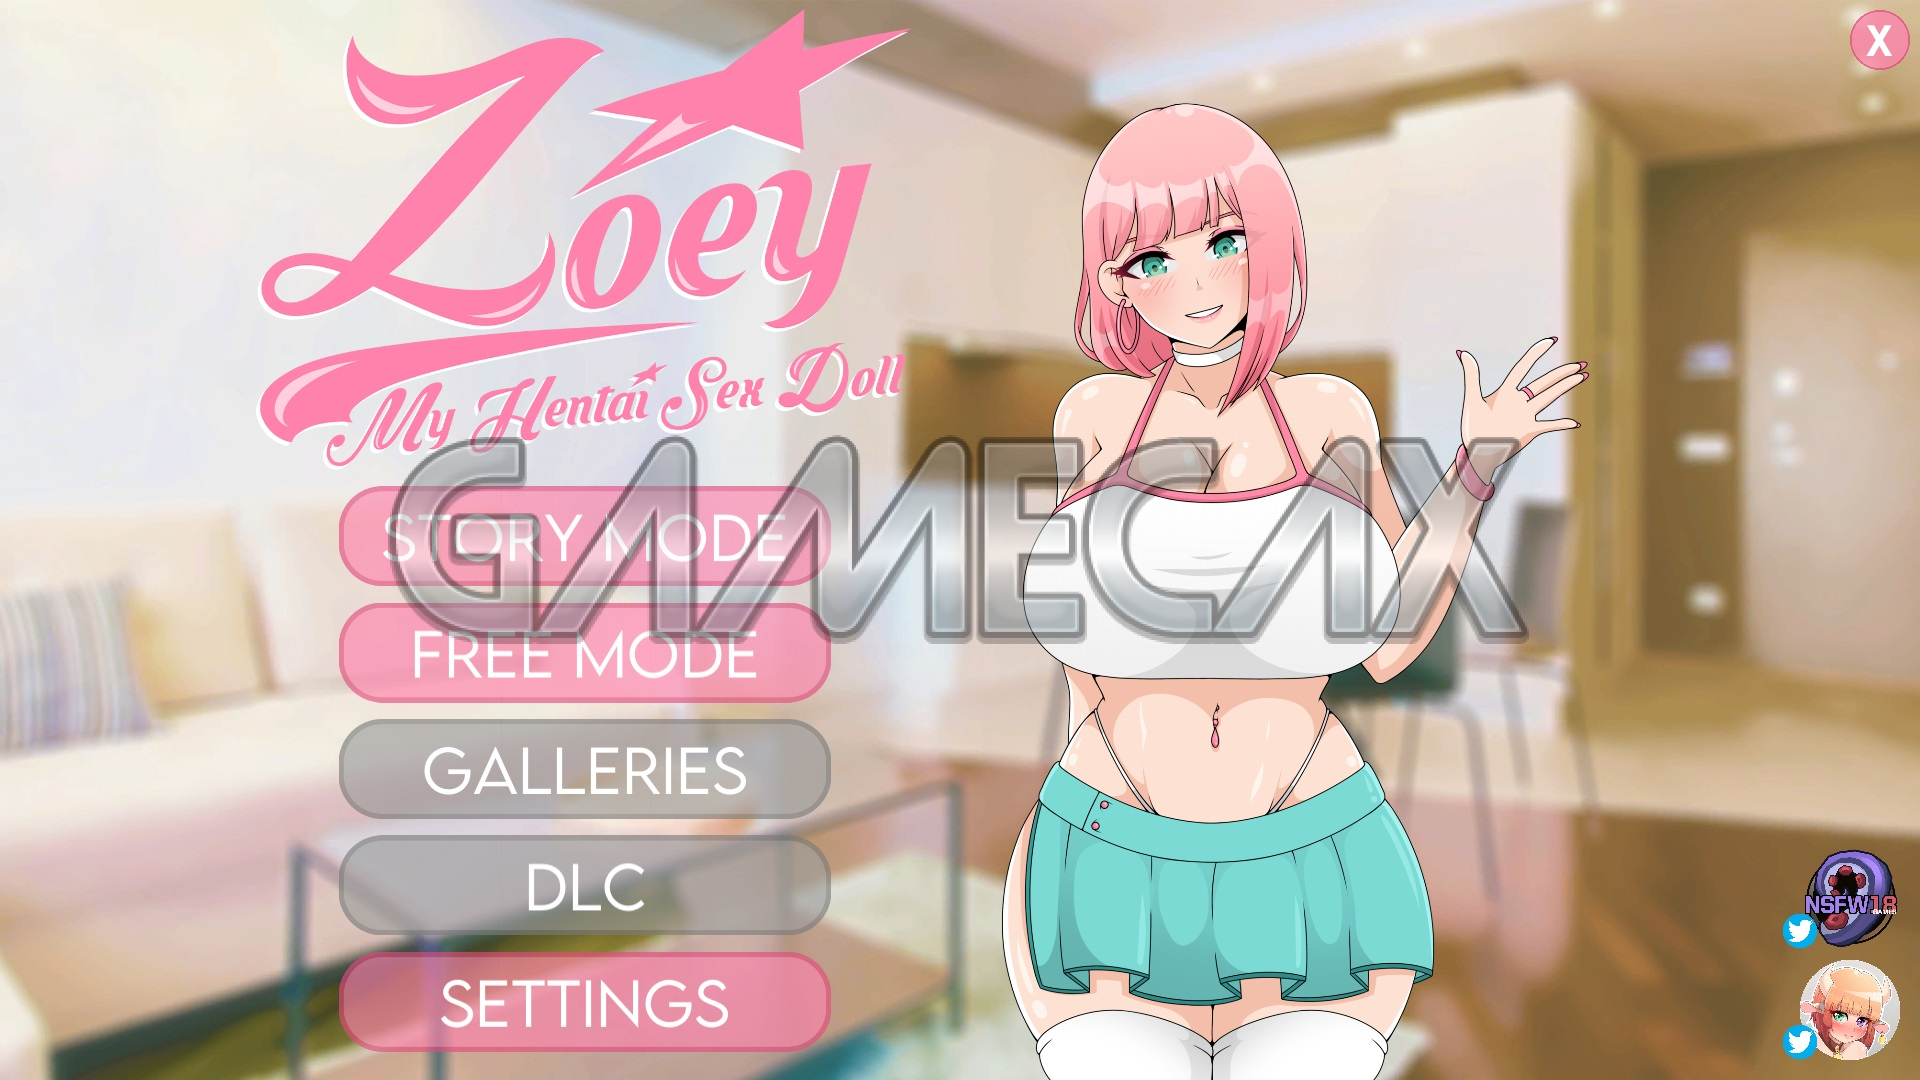 Zoey my hentai sex doll